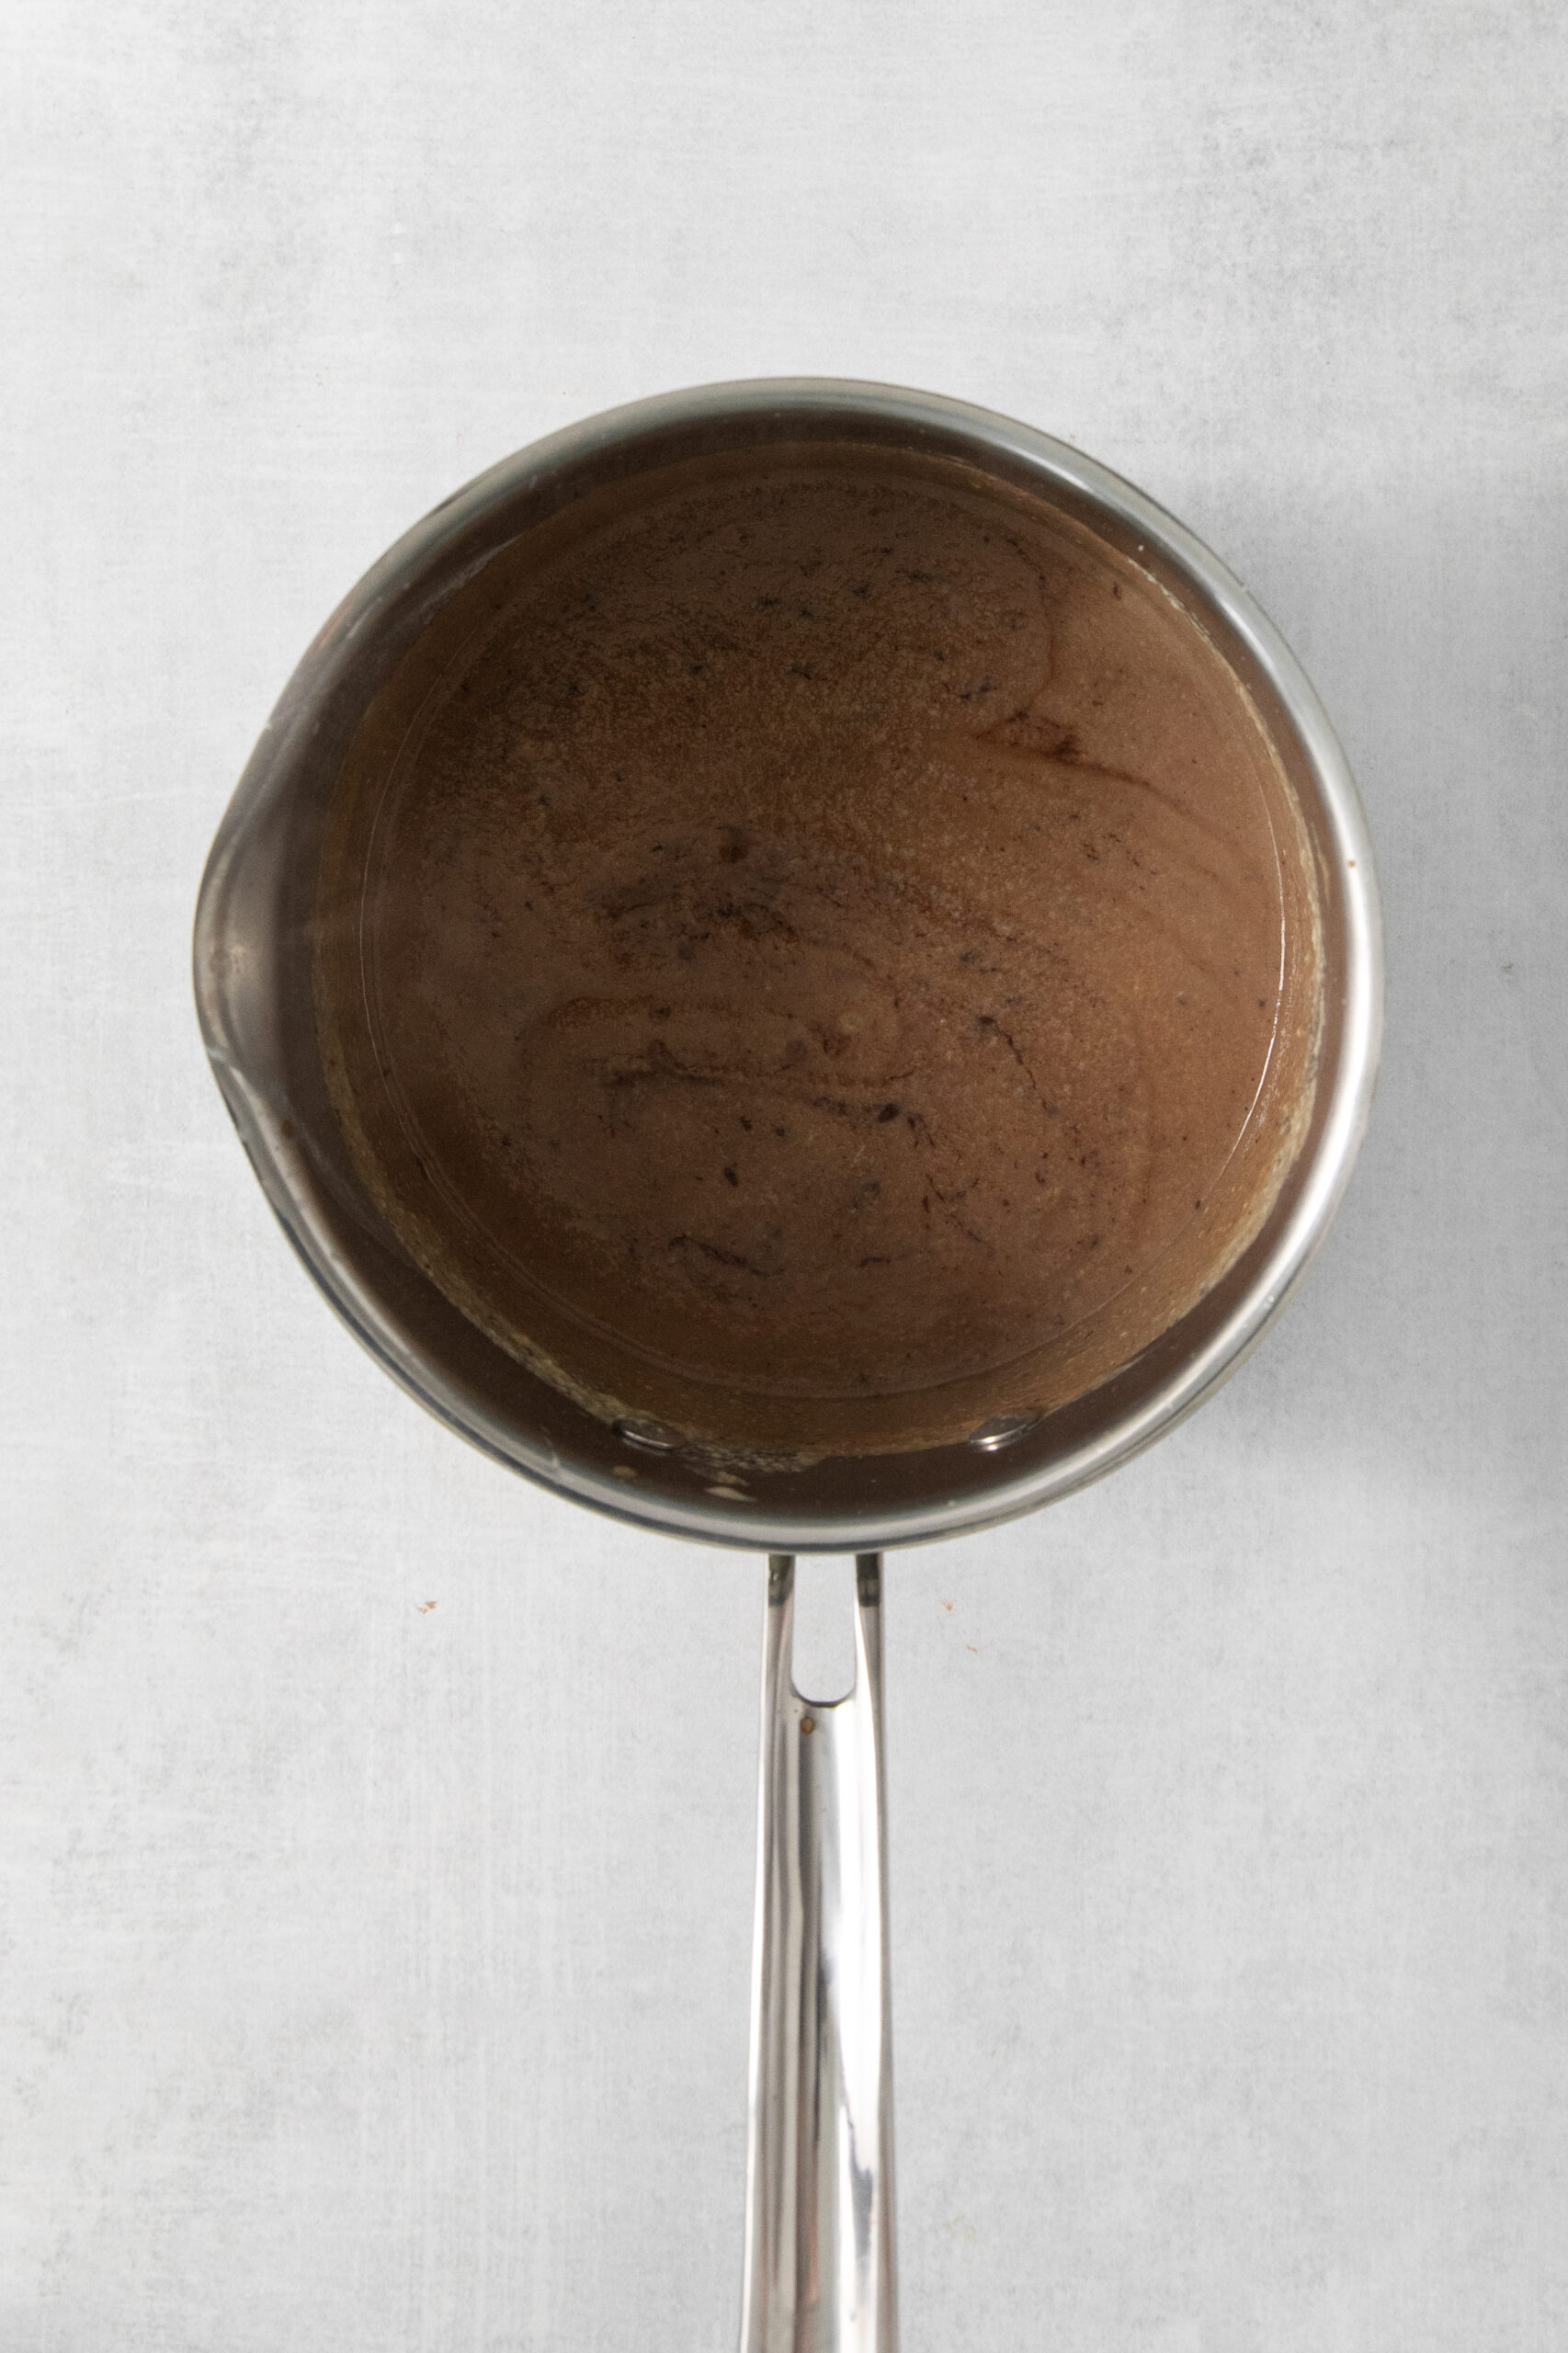 custard mixture with chocolate mixed in, in a pan